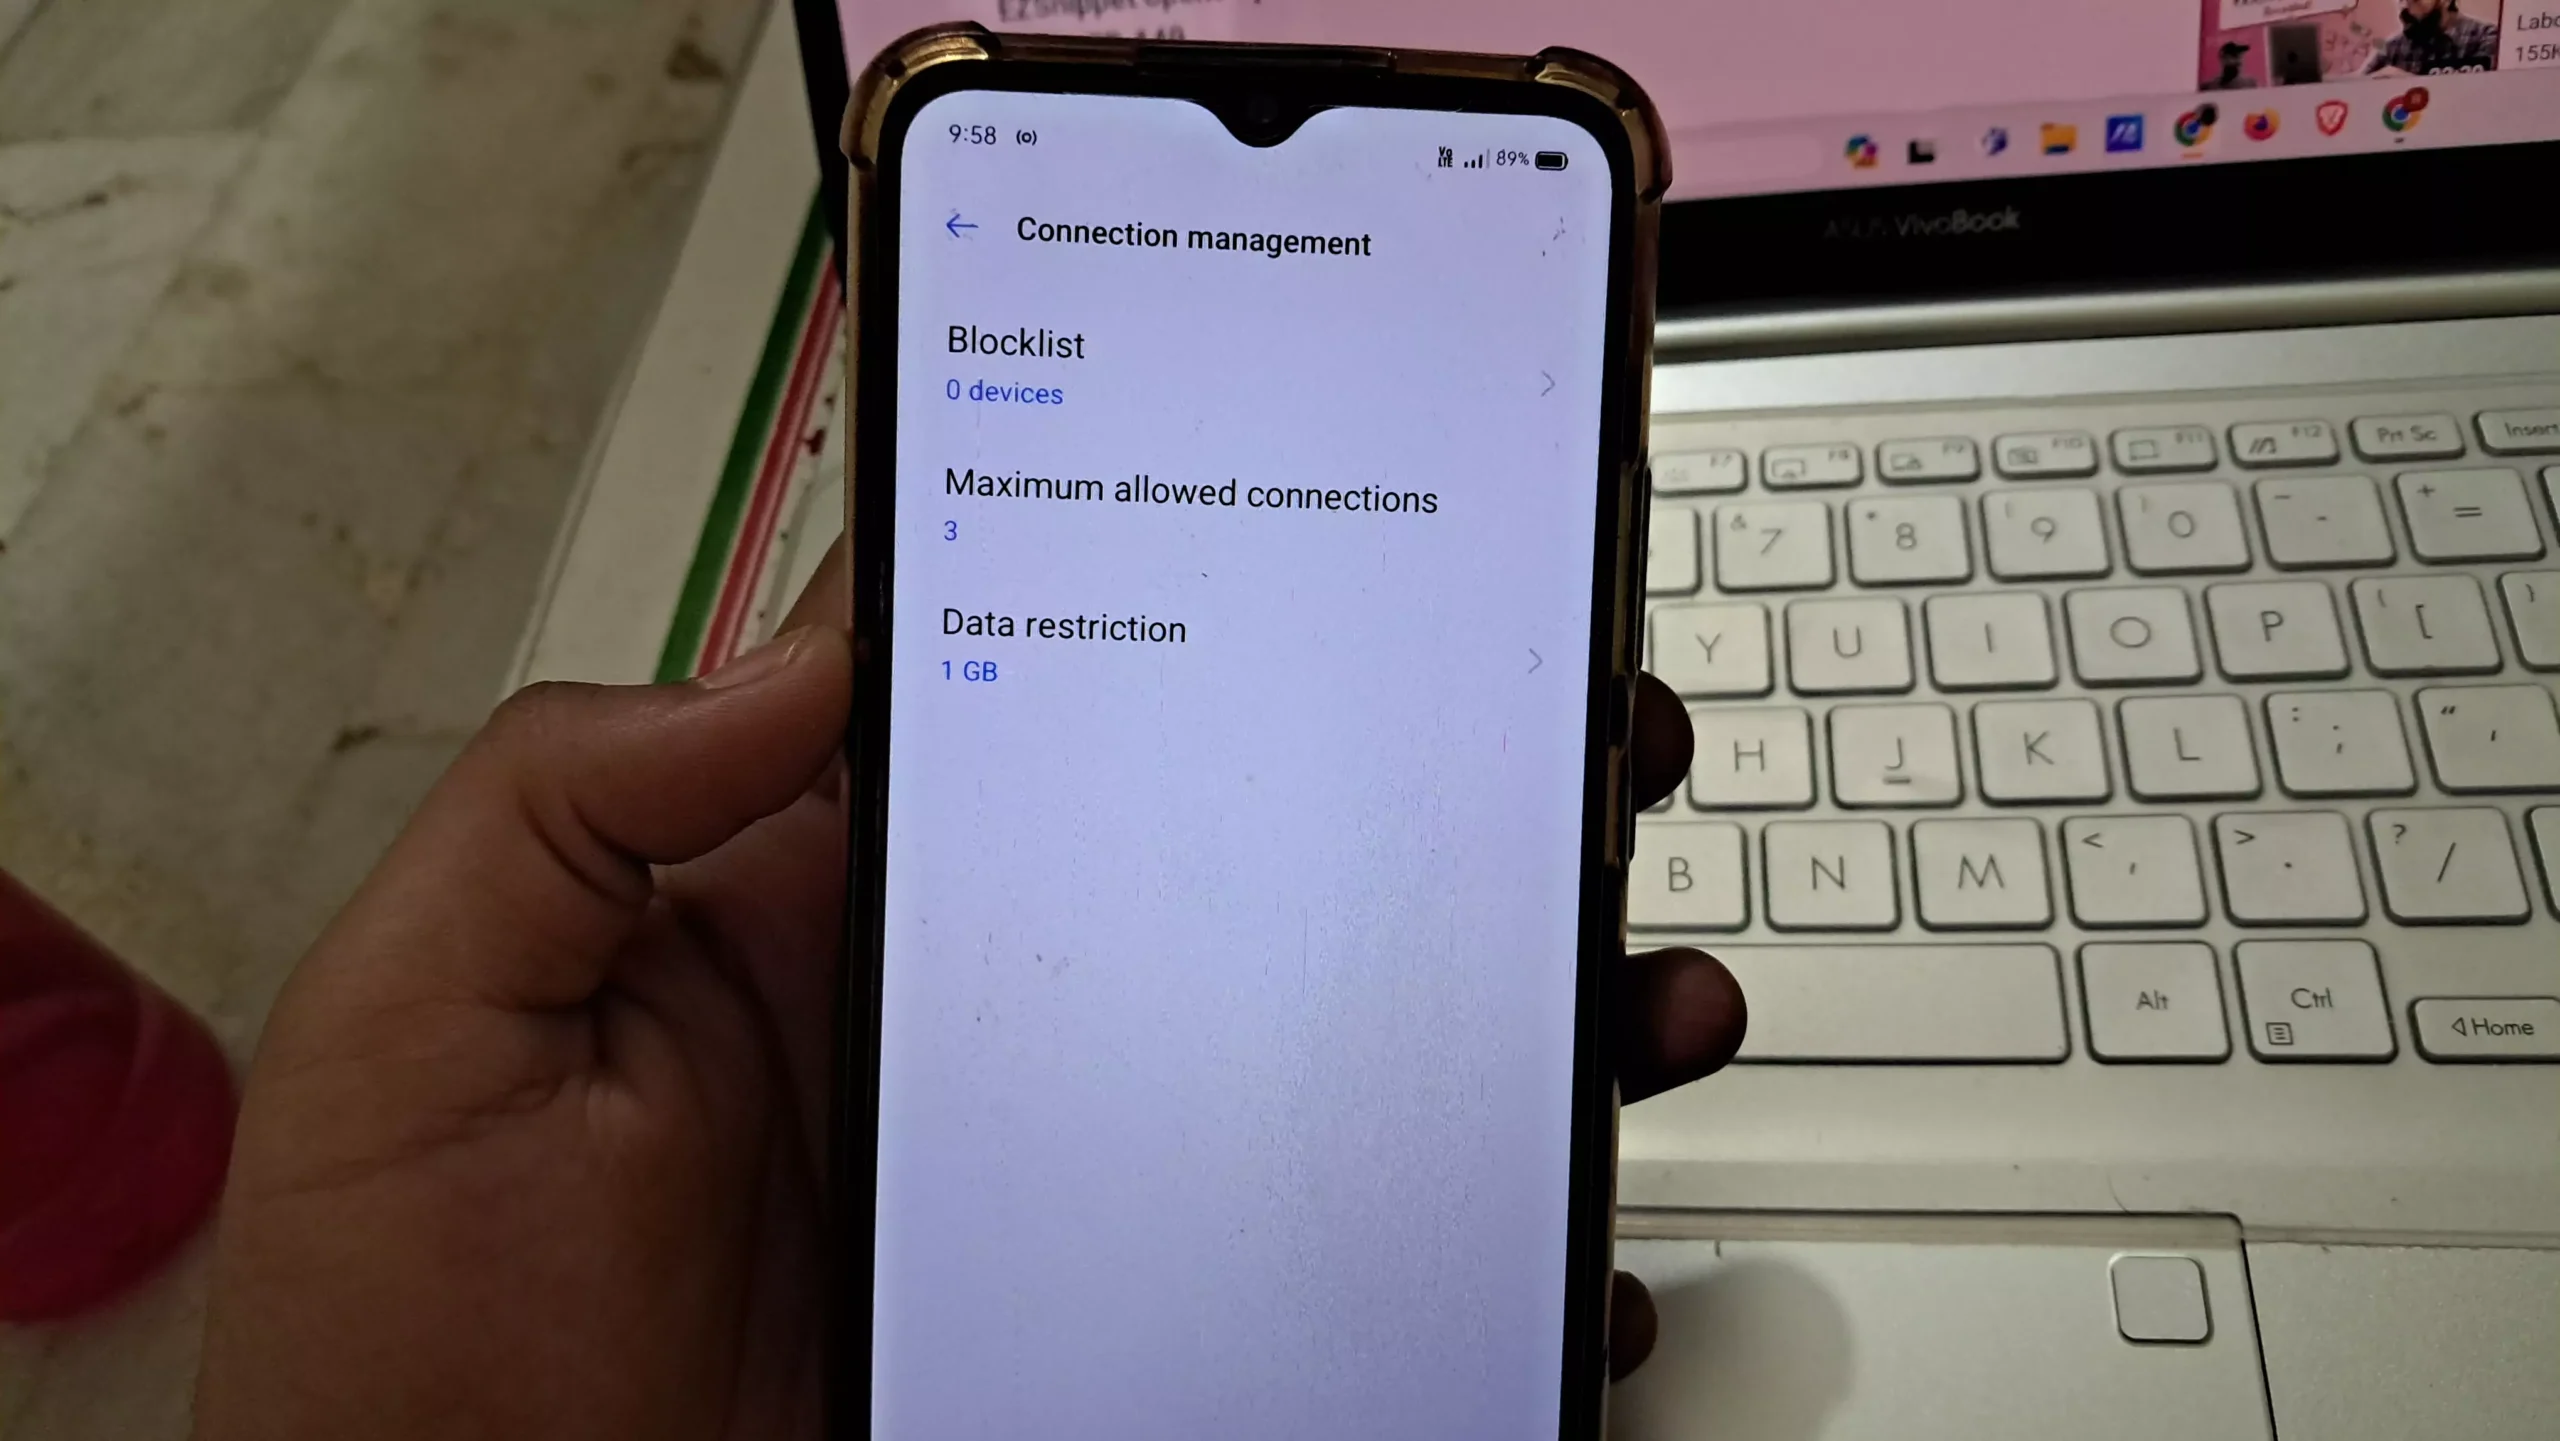 connection management image for personal hotspot